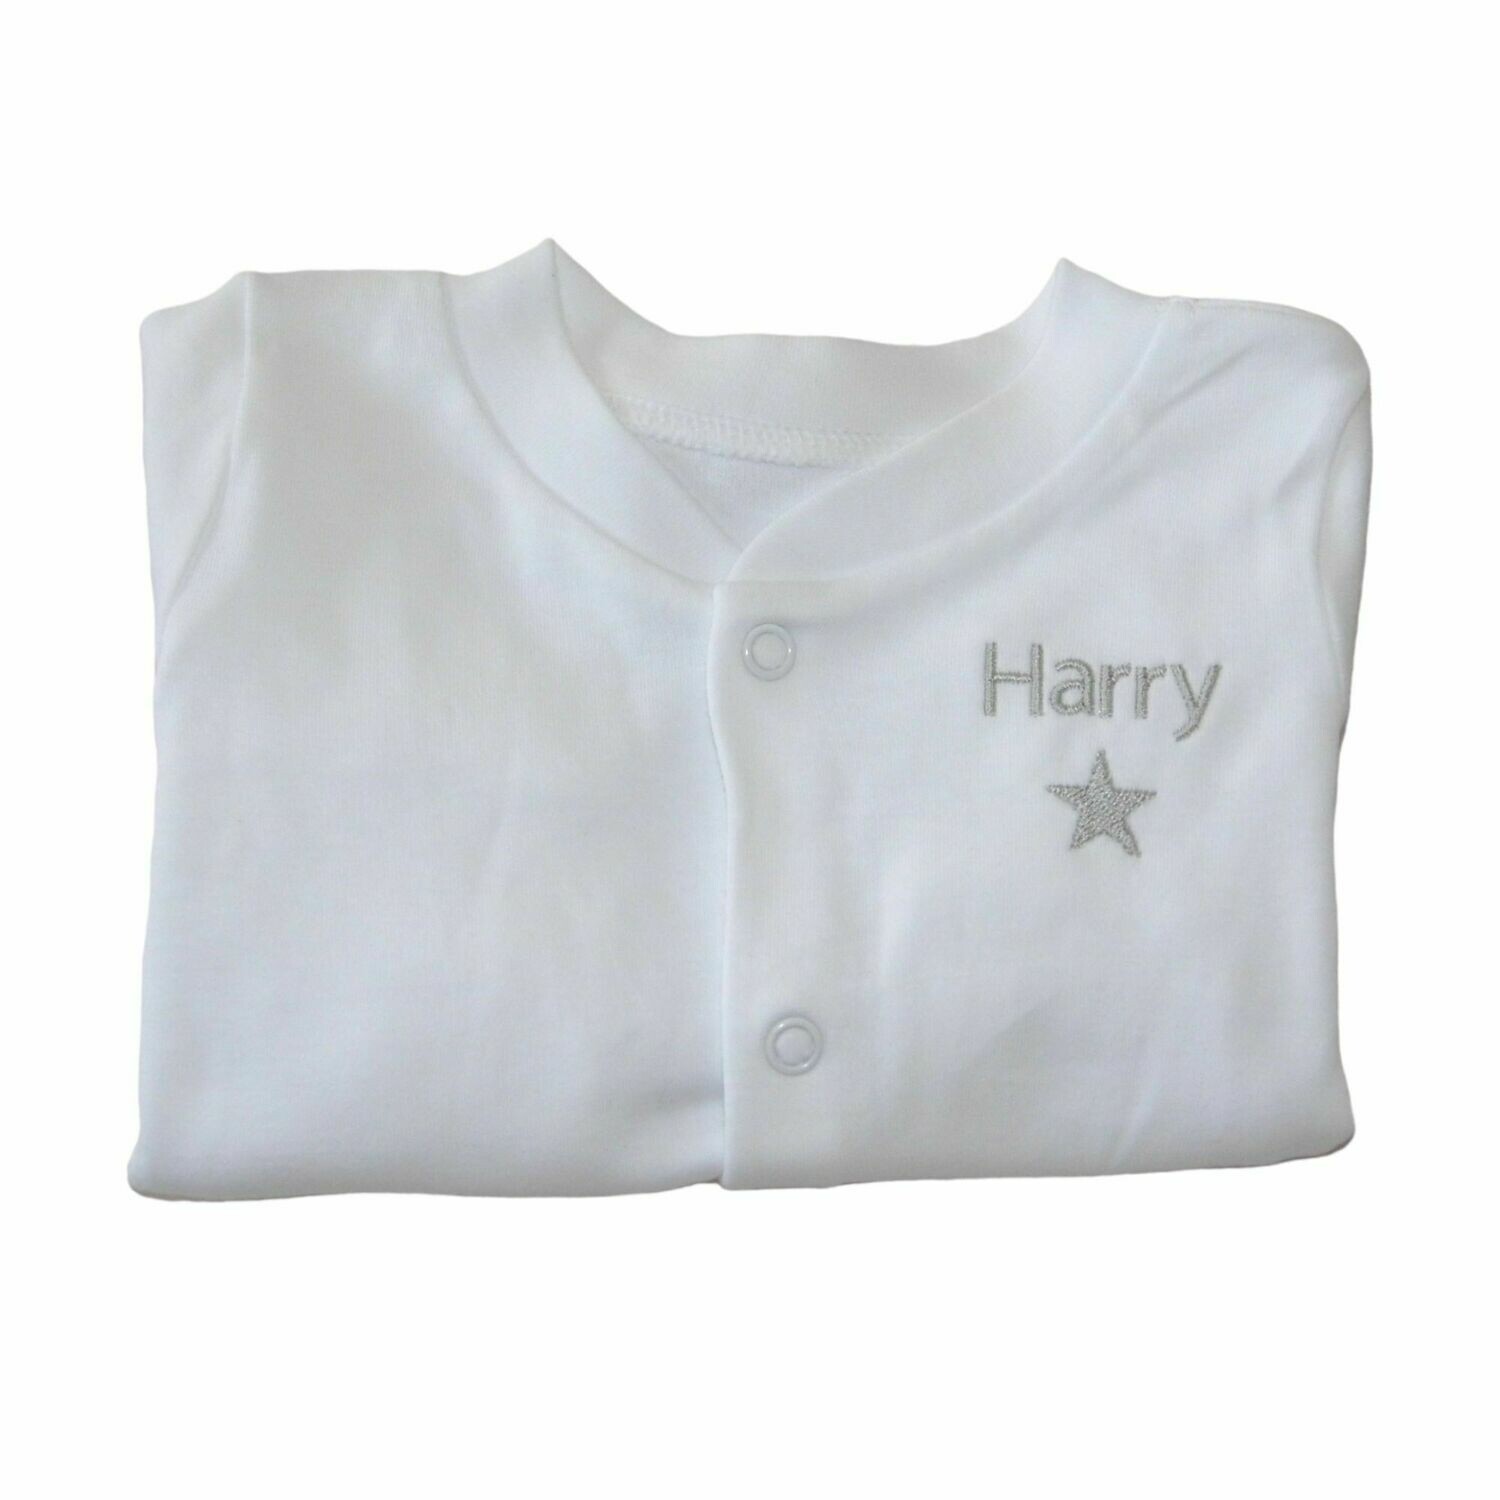 Personalised Baby Sleepsuit with Embroidered Star and Name or Initials